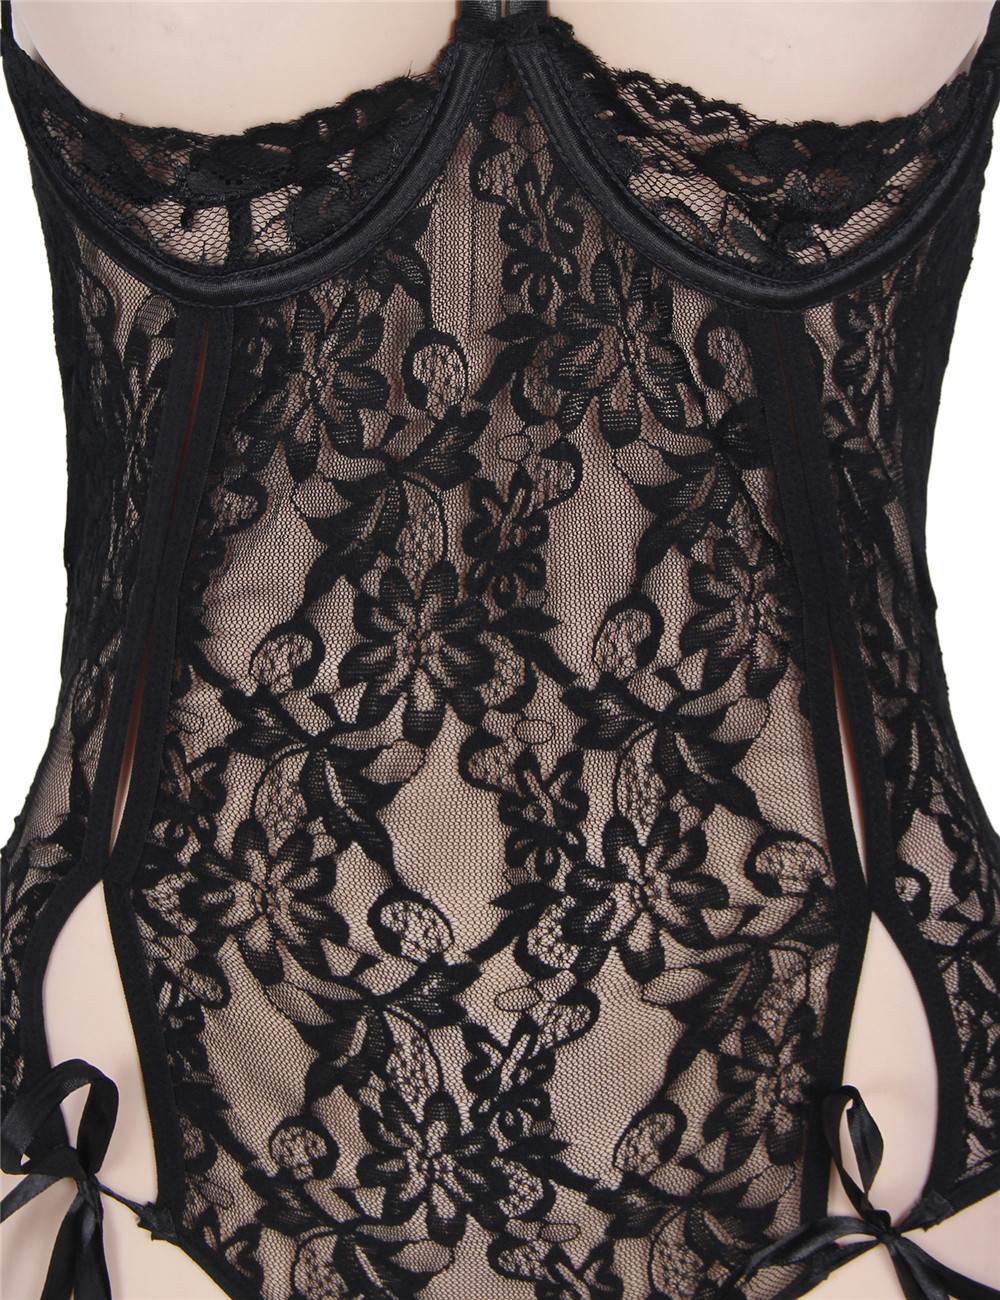 Adult Sex Black Lace Open Bust Teddy